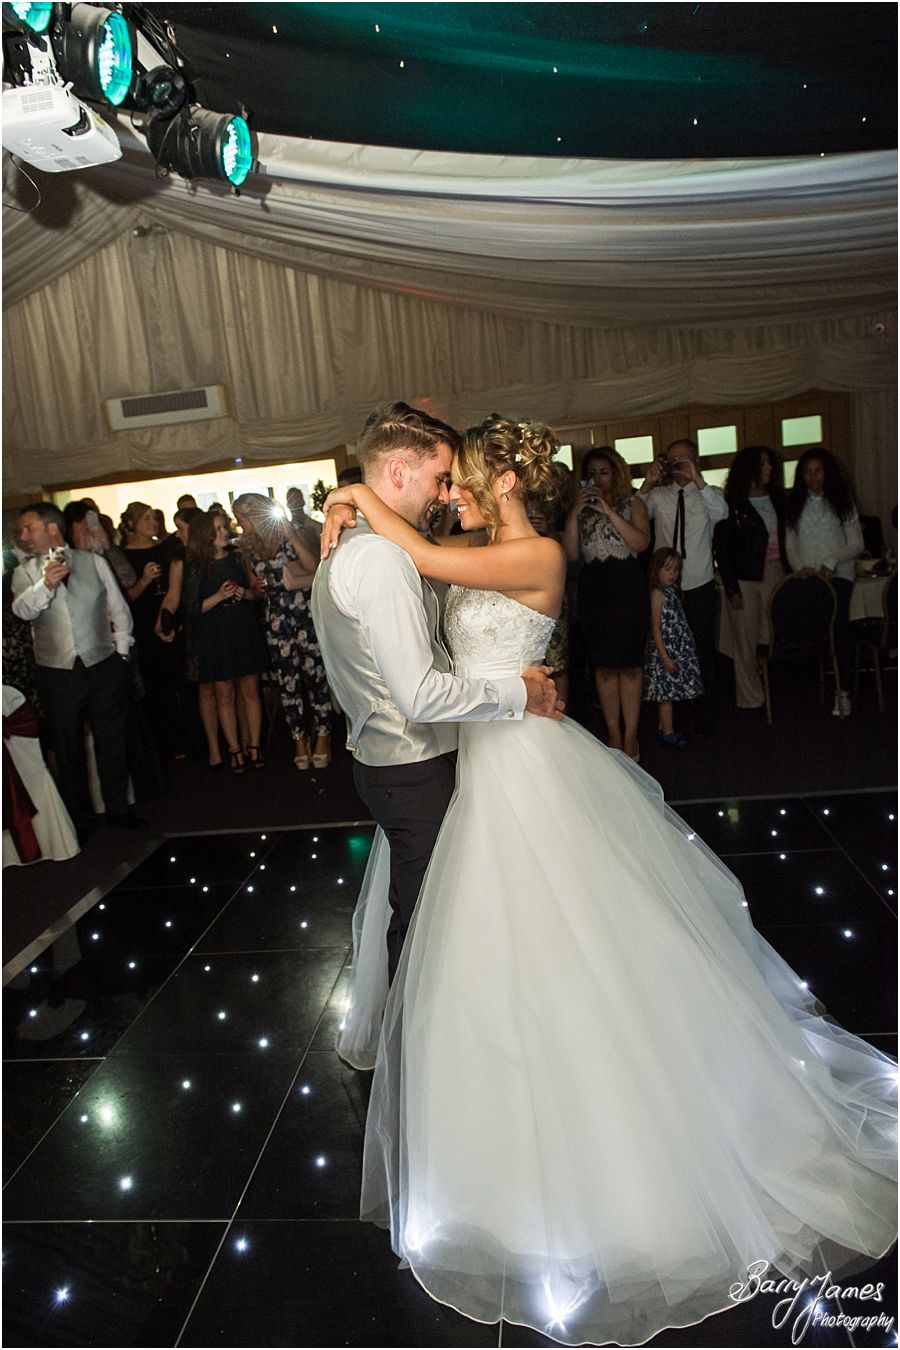 Storytelling fun wedding photography at Calderfields Golf Club in Walsall by Walsall Wedding Photographer Barry James